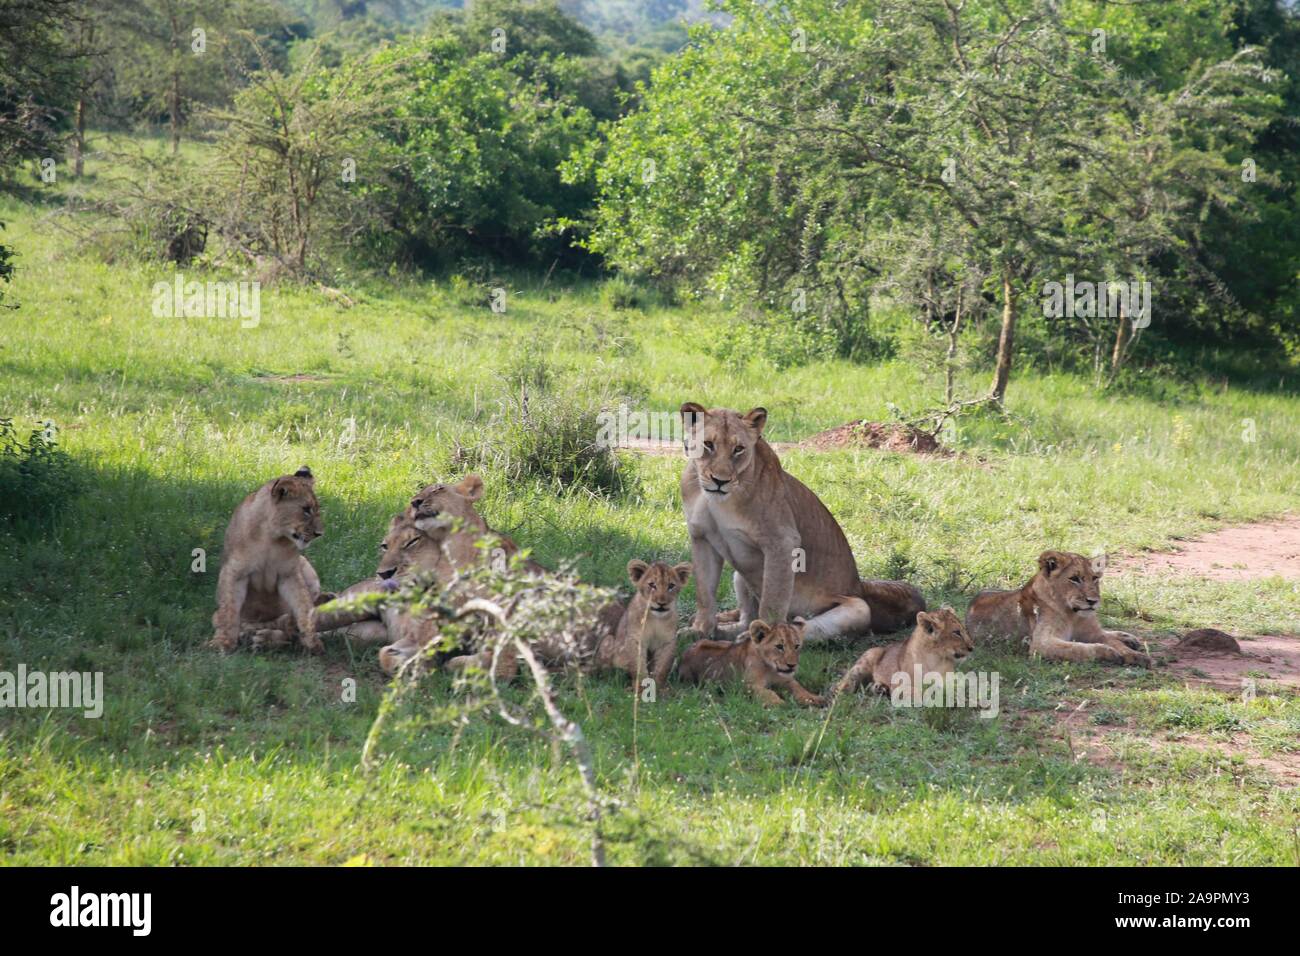 (191117) -- KIGALI, Nov. 17, 2019 (Xinhua) -- Lions are seen at Akagera National Park, eastern Rwanda, Nov. 17, 2019. Since 2010, Akagera National Park has undergone a revival, with poaching practically eliminated, allowing for key species to be reintroduced, including lions in 2015, which have since tripled in number, and rhinos in 2017, a decade after they were last seen in Rwanda. In June 2019, five more critically endangered black rhinos from Europe were translocated to the park. (Xinhua/Lyu Tianran) Stock Photo